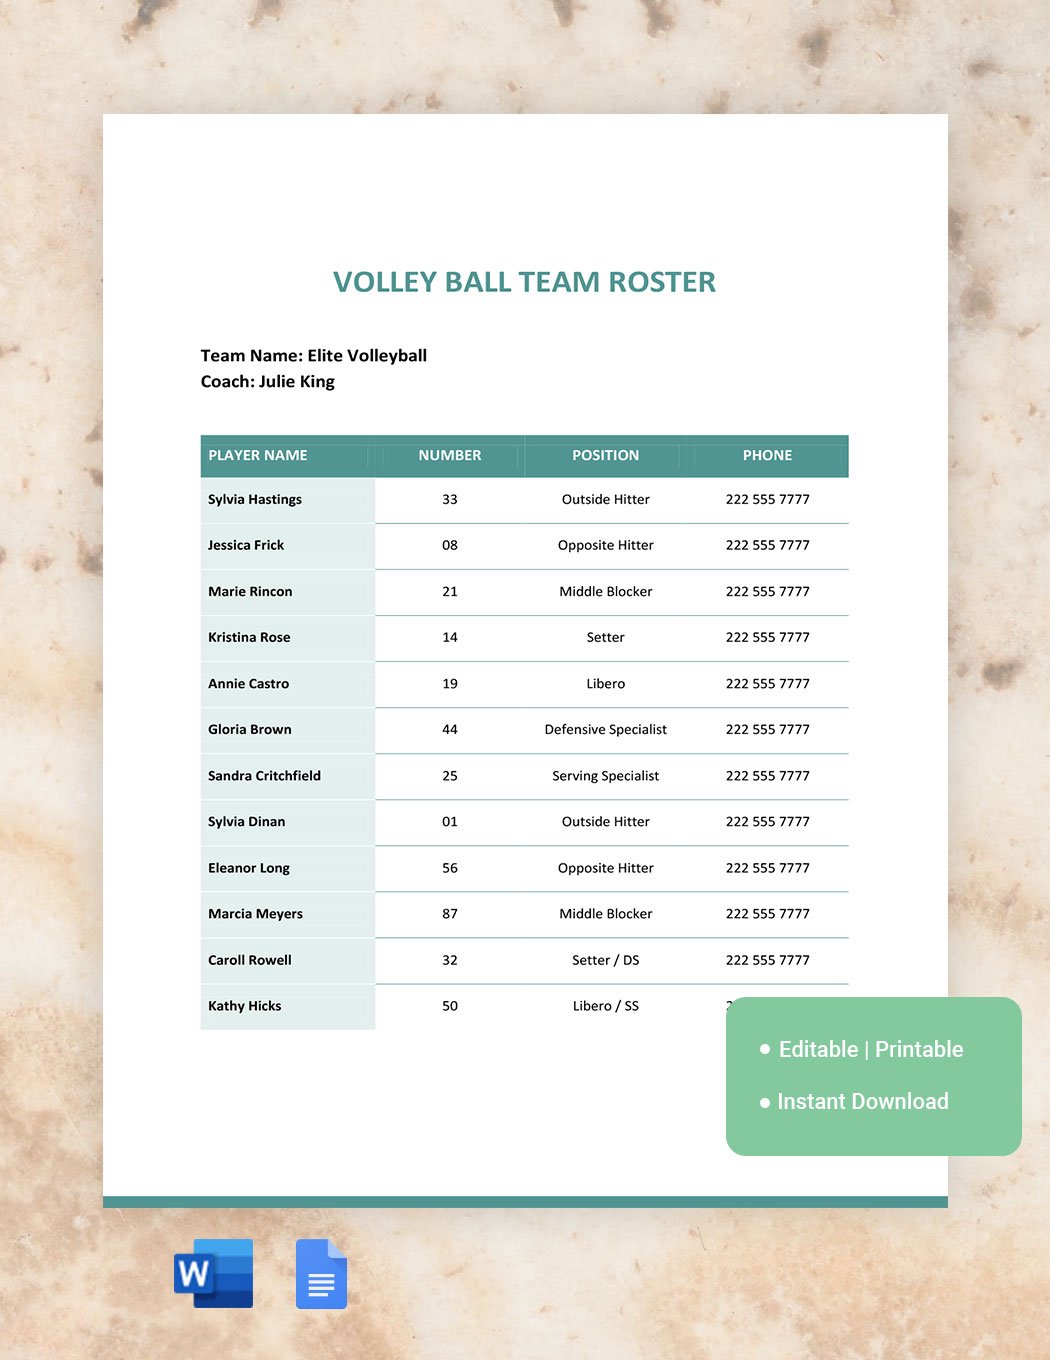 Volley Ball Template - Download in Word, Google Docs | Template.net